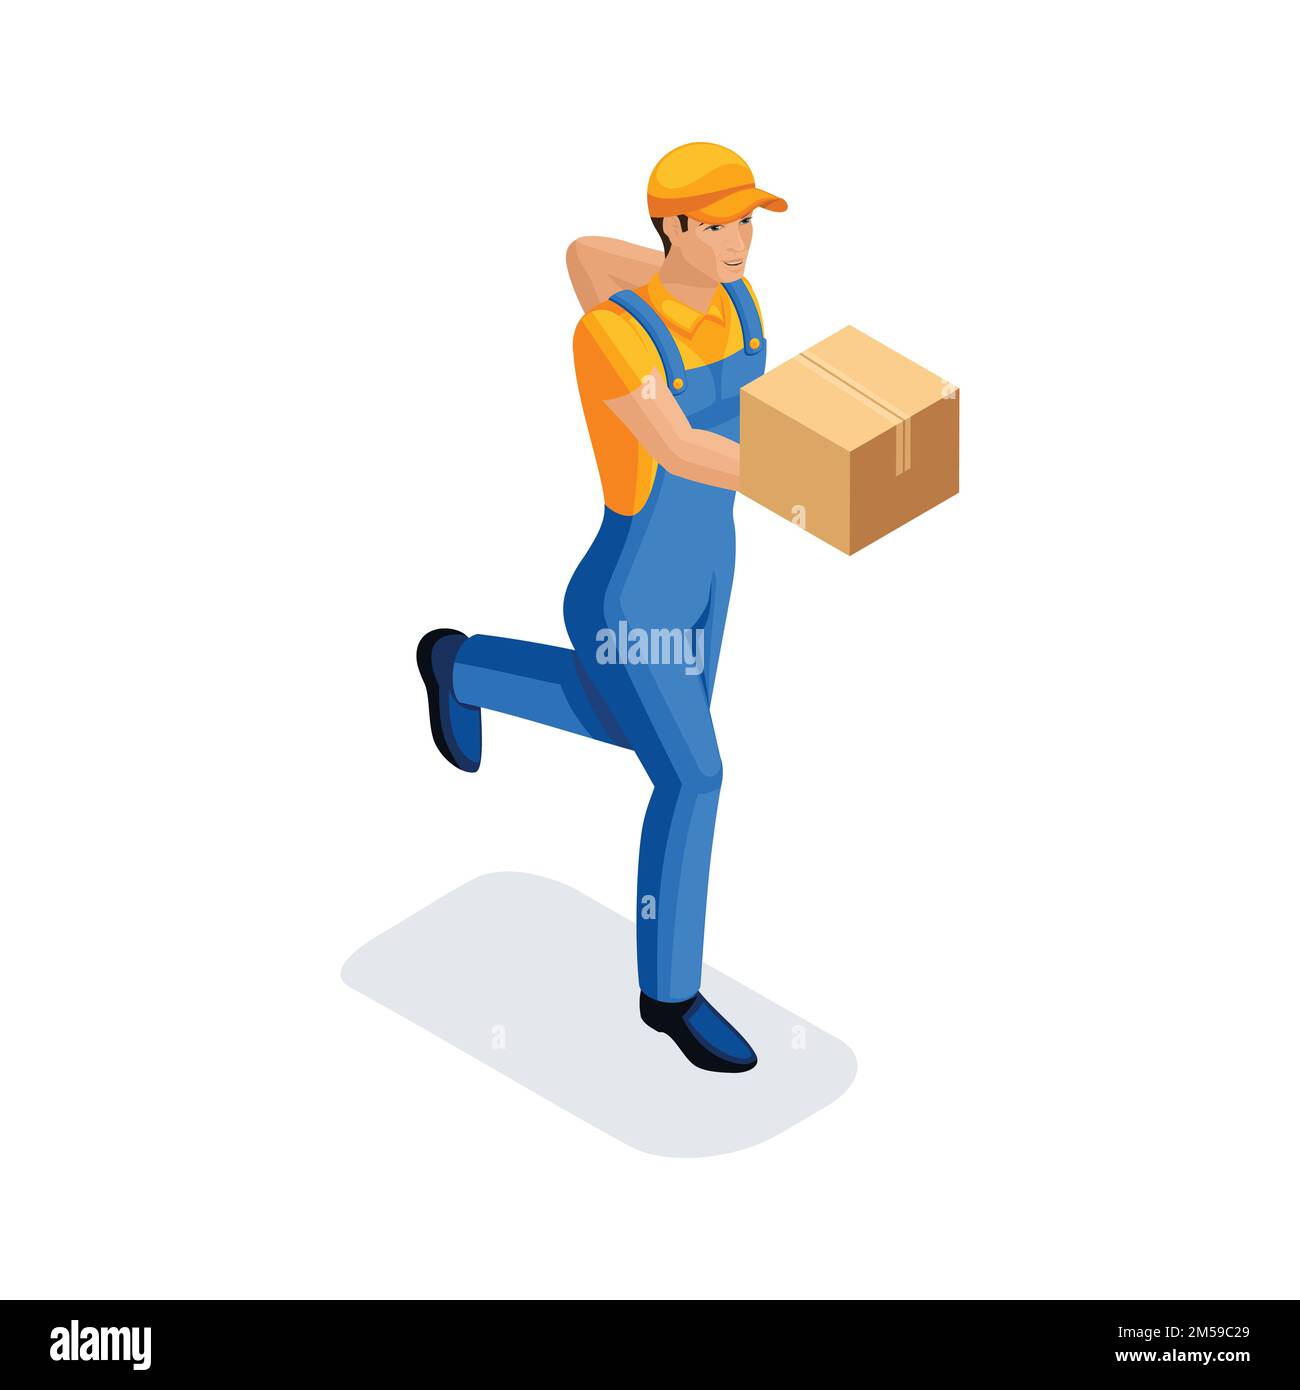 Isometric man in uniform is running delivering an order in a cardboard box. Delivery Concept. Fast delivery van. Delivery man. 3D character of emotion Stock Vector